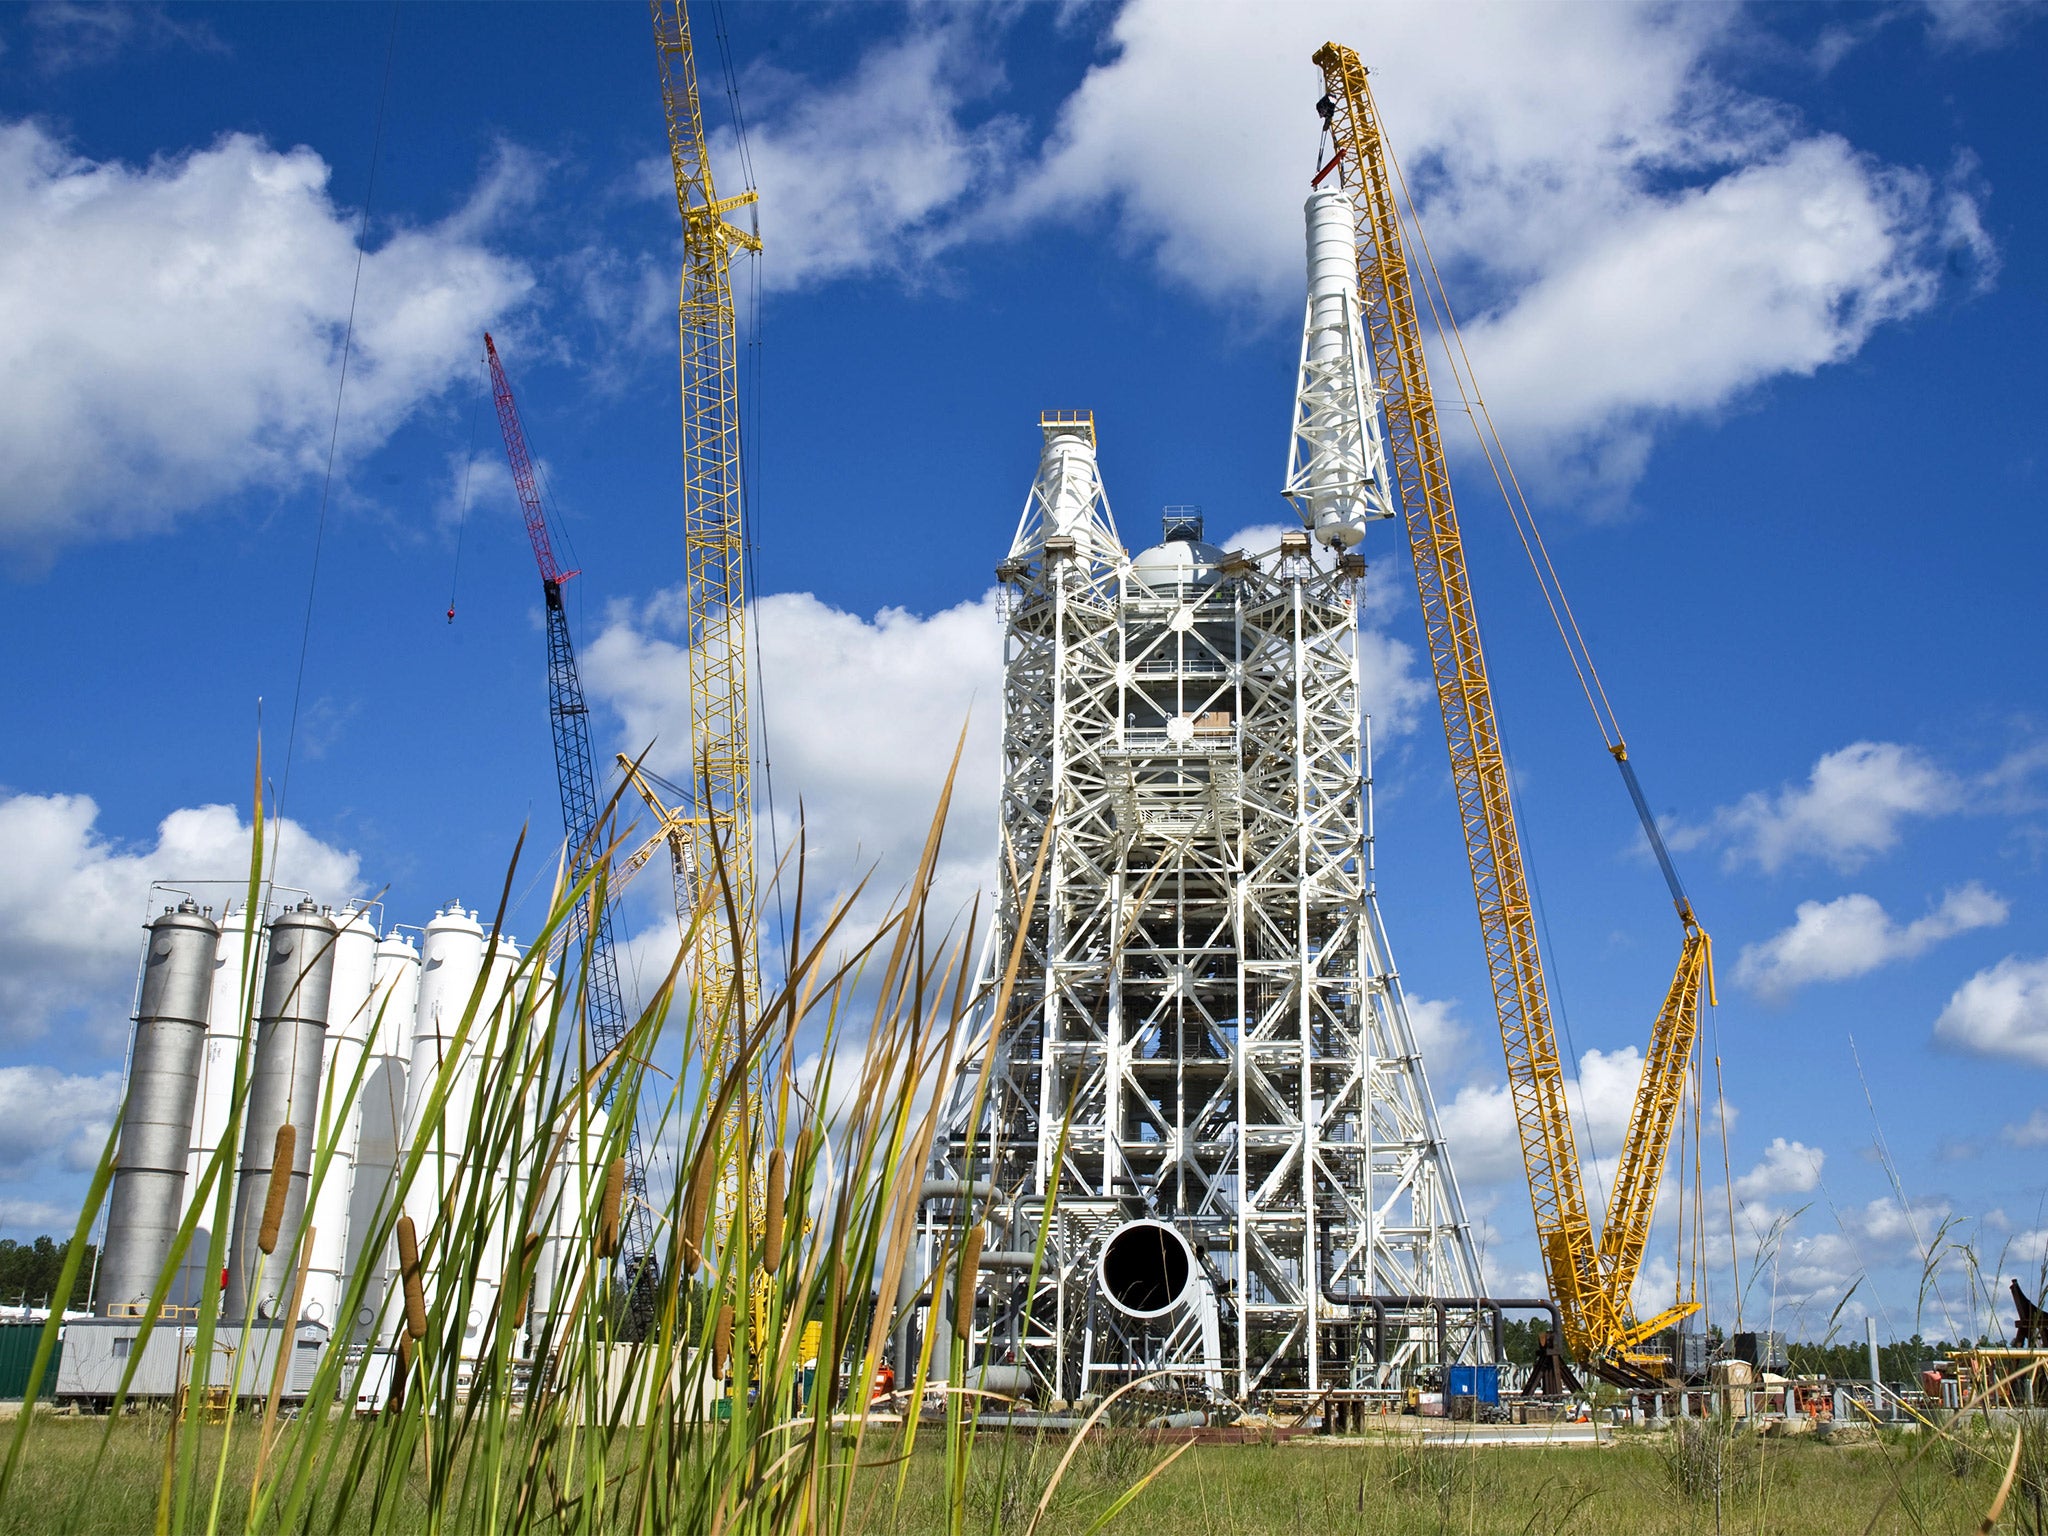 The A-3 test stand at Stennis Space Centre